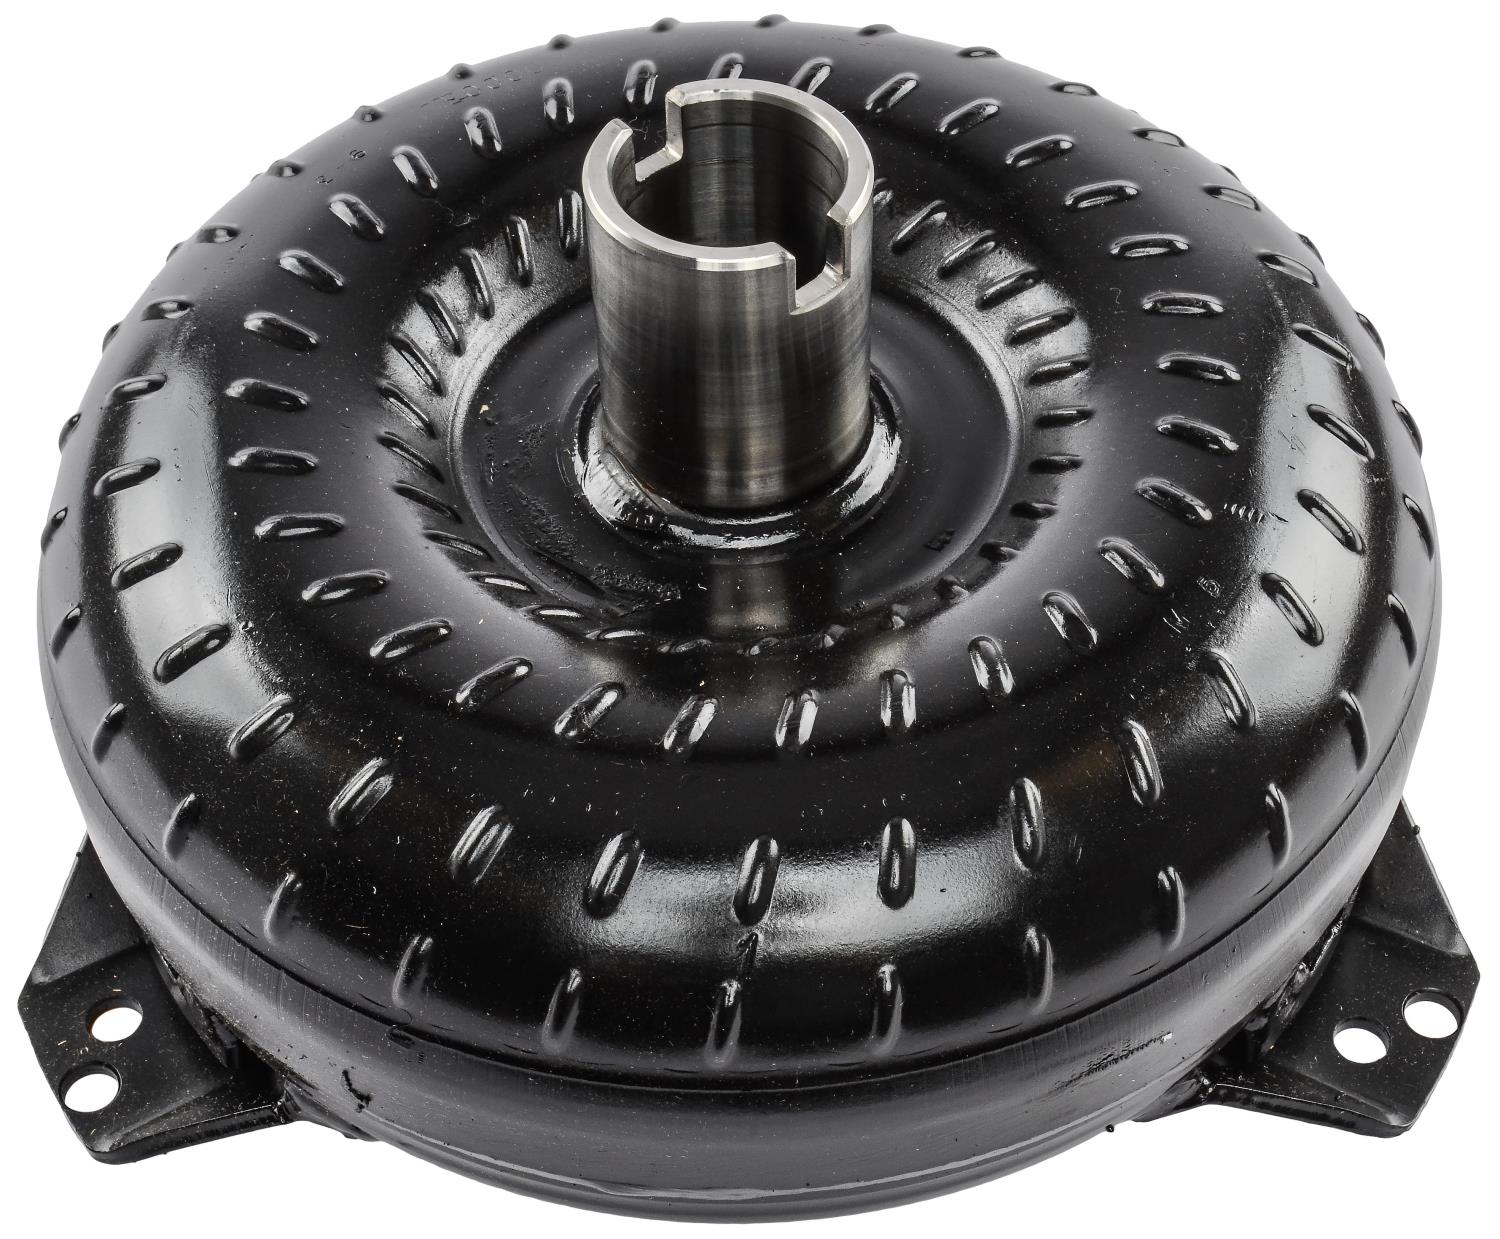 Torque Converter for GM TH350/TH400 [3100-3500 RPM Stall